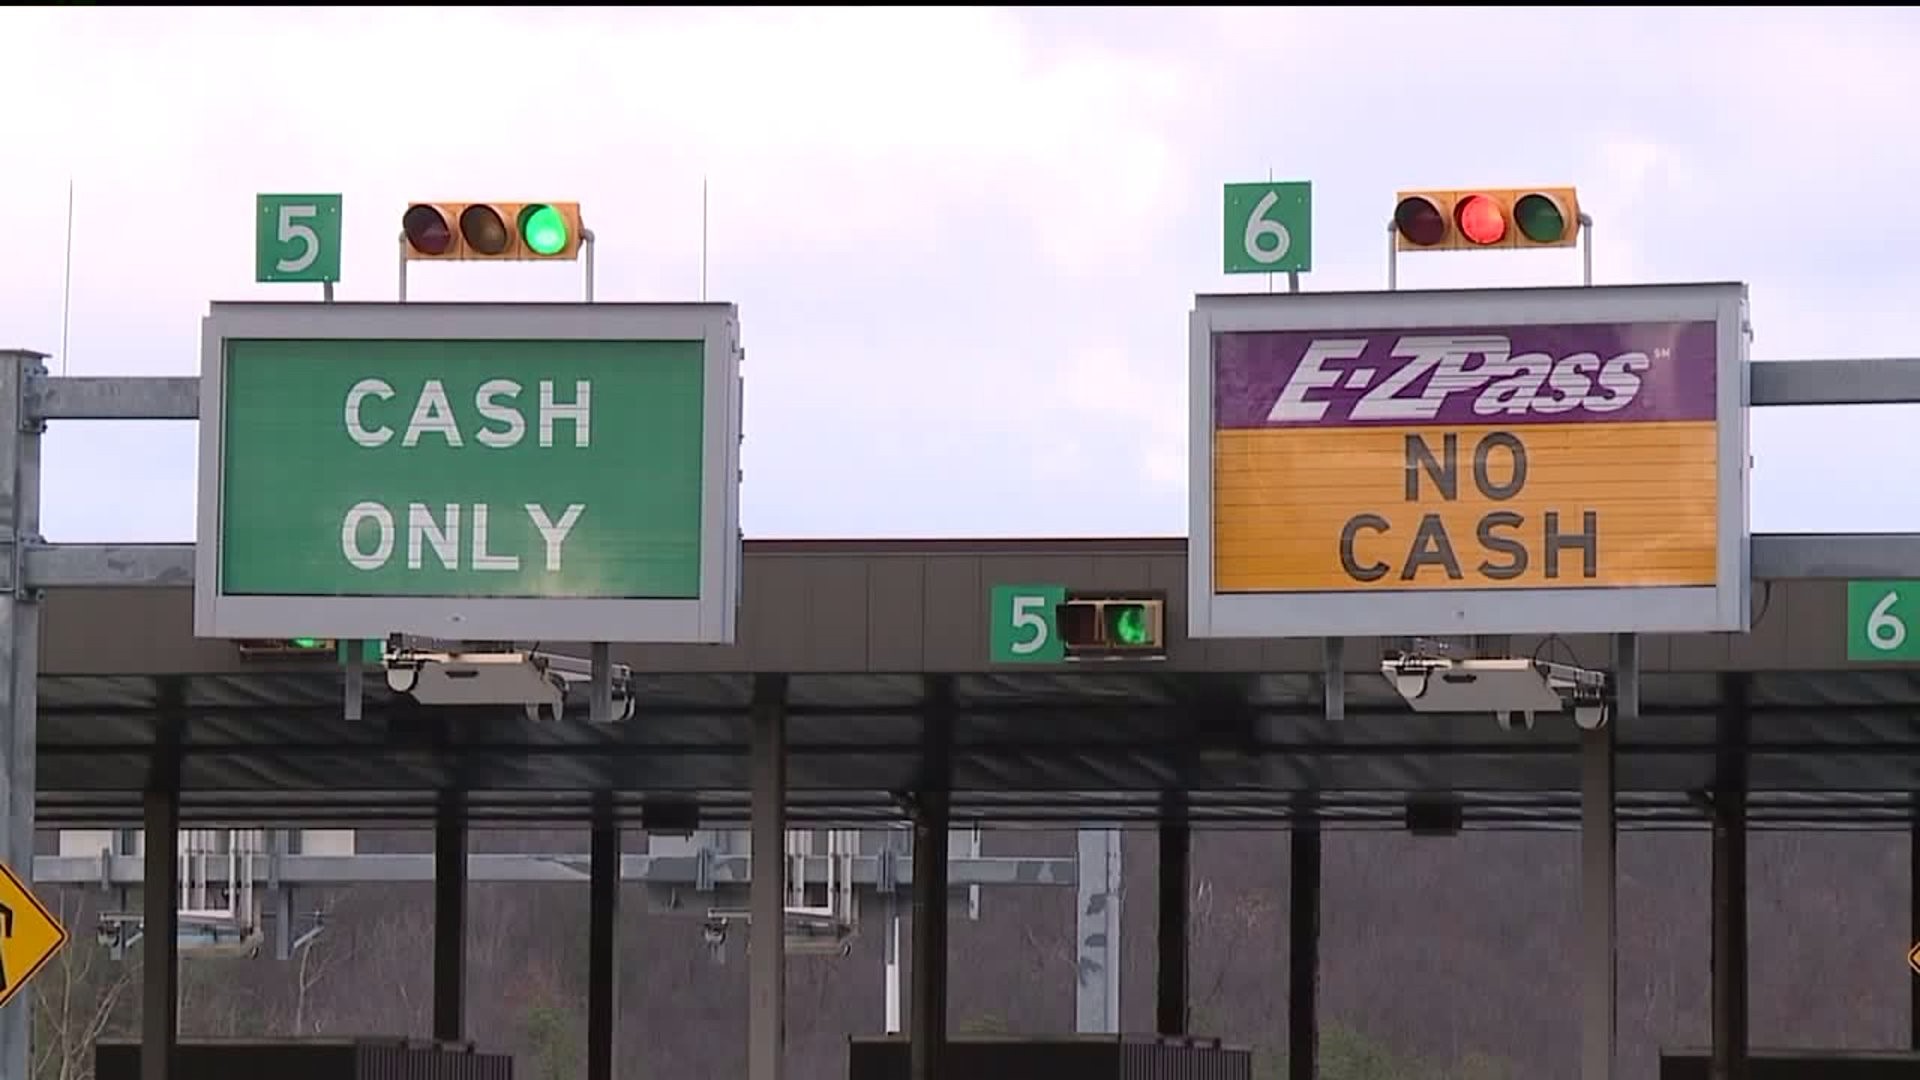 Turnpike Tolls Costly in the Wyoming Valley